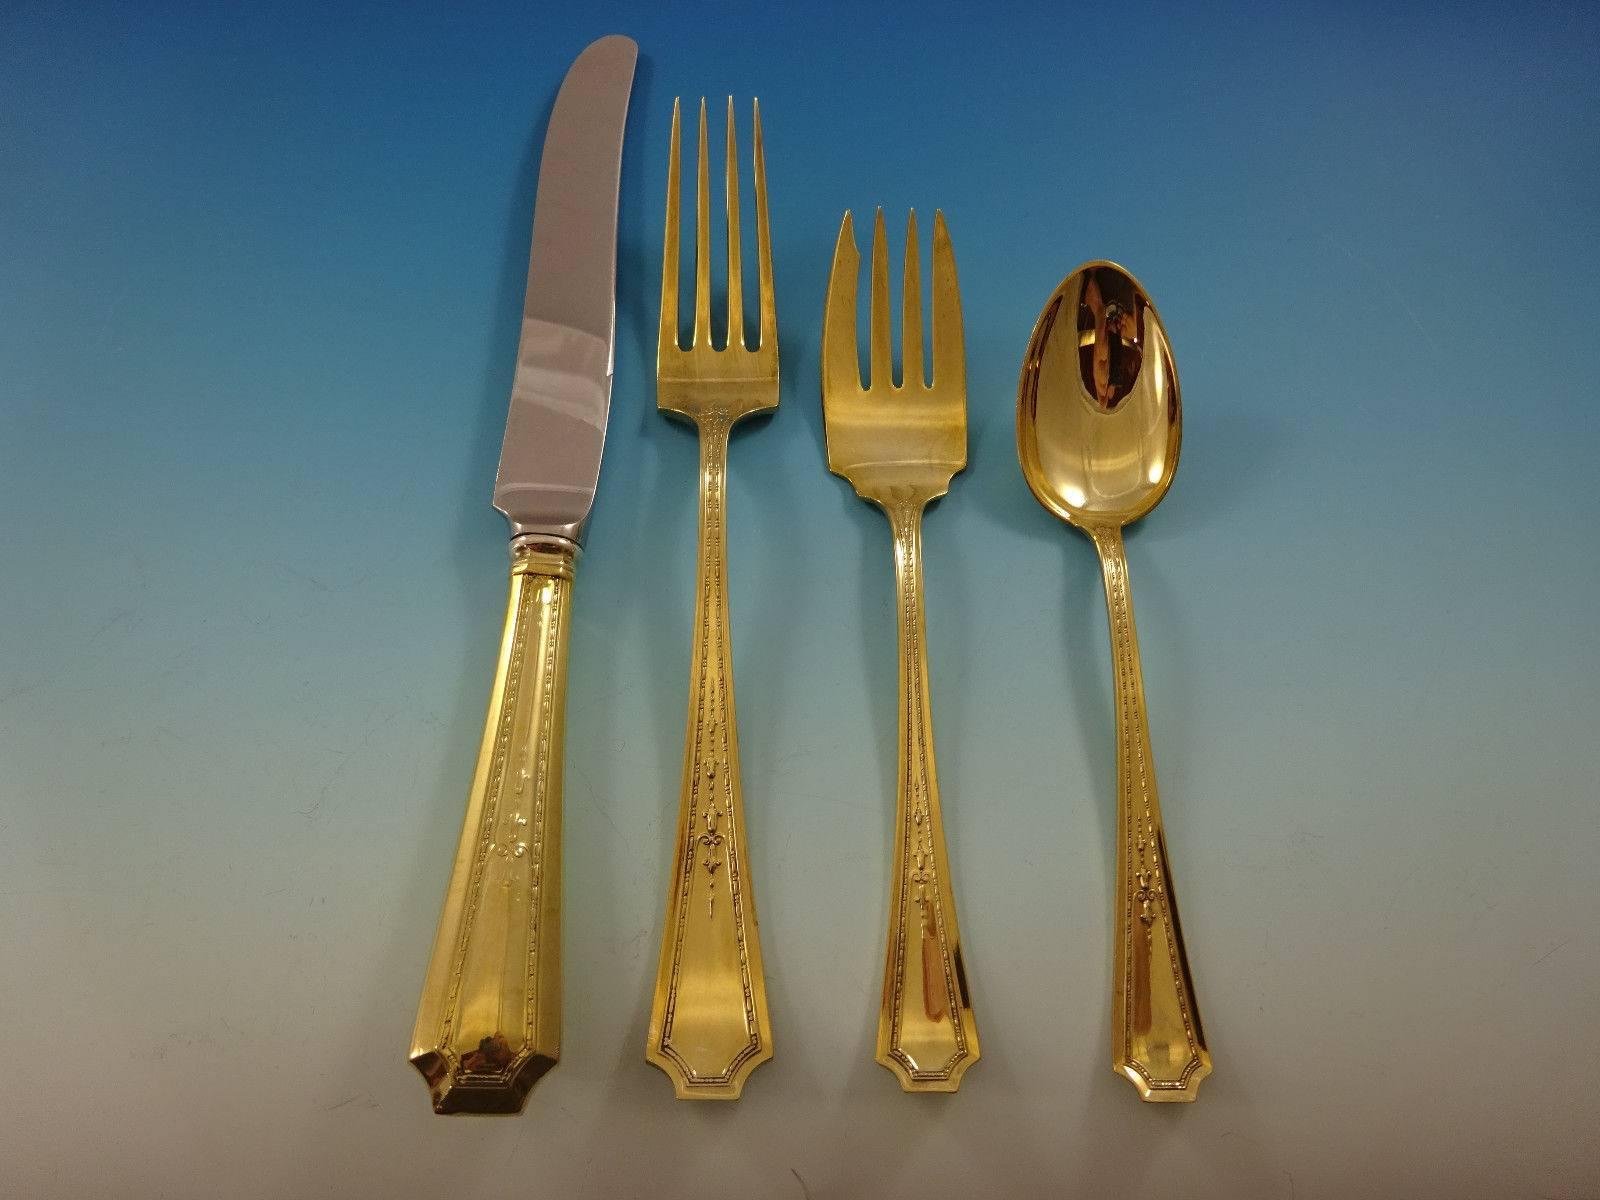 Stunning Colfax Gold by Durgin-Gorham sterling silver flatware set of 48 pieces. Gold flatware is on trend and makes a bold statement on your table. This set is vermeil (completely gold-washed over sterling silver) and includes:

 
12 knives, 8